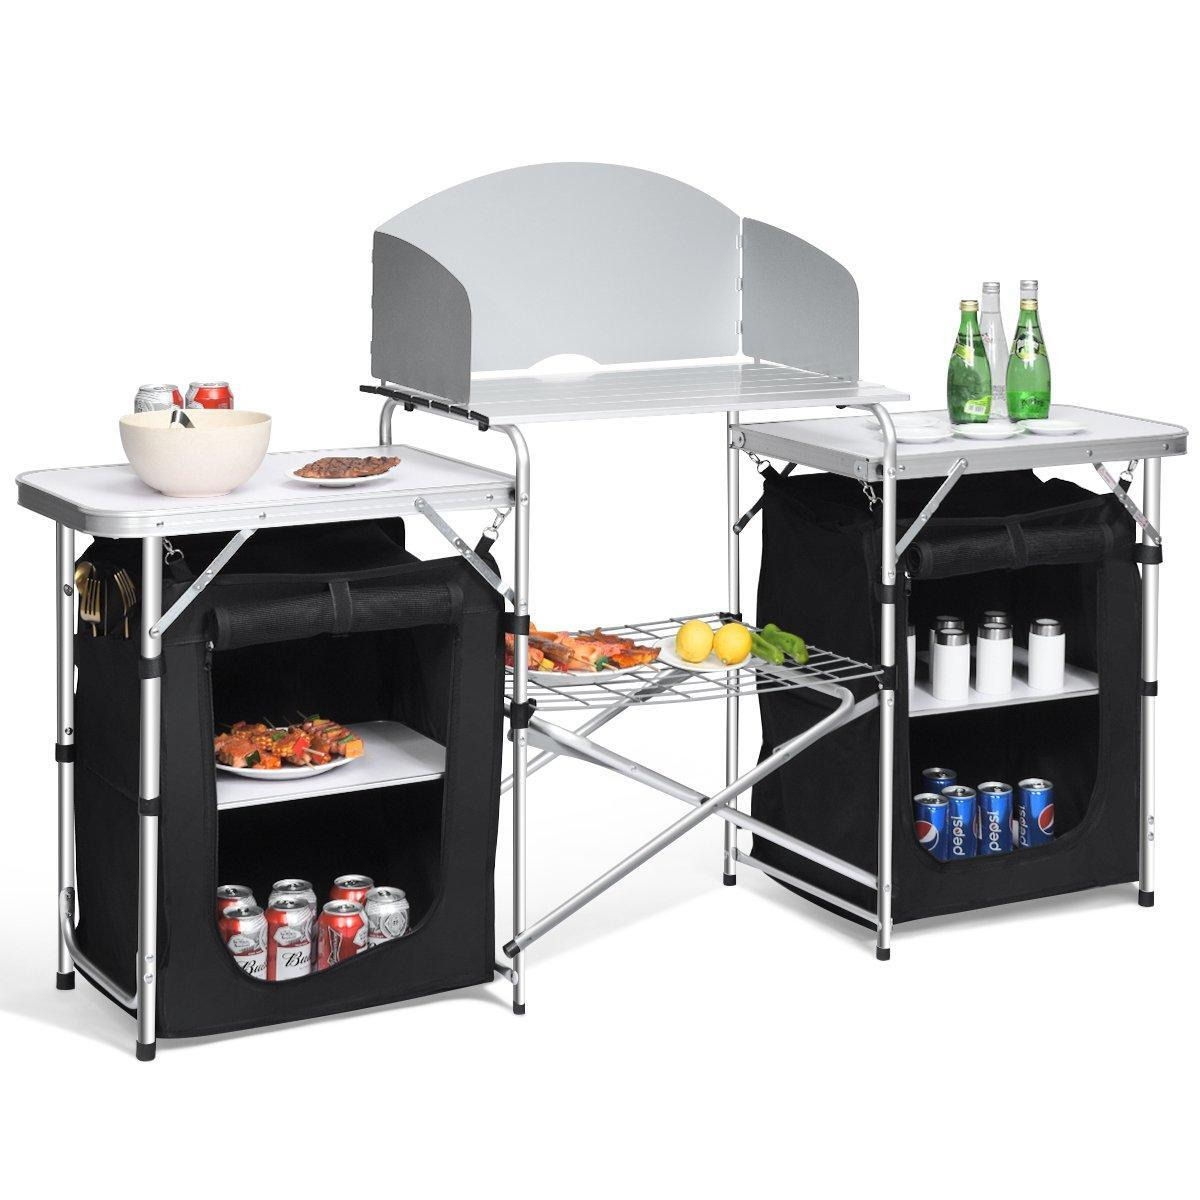 2 in 1 Folding Table Camping Kitchen Storage Aluminum Stand Table Cooking BBQ - image 1